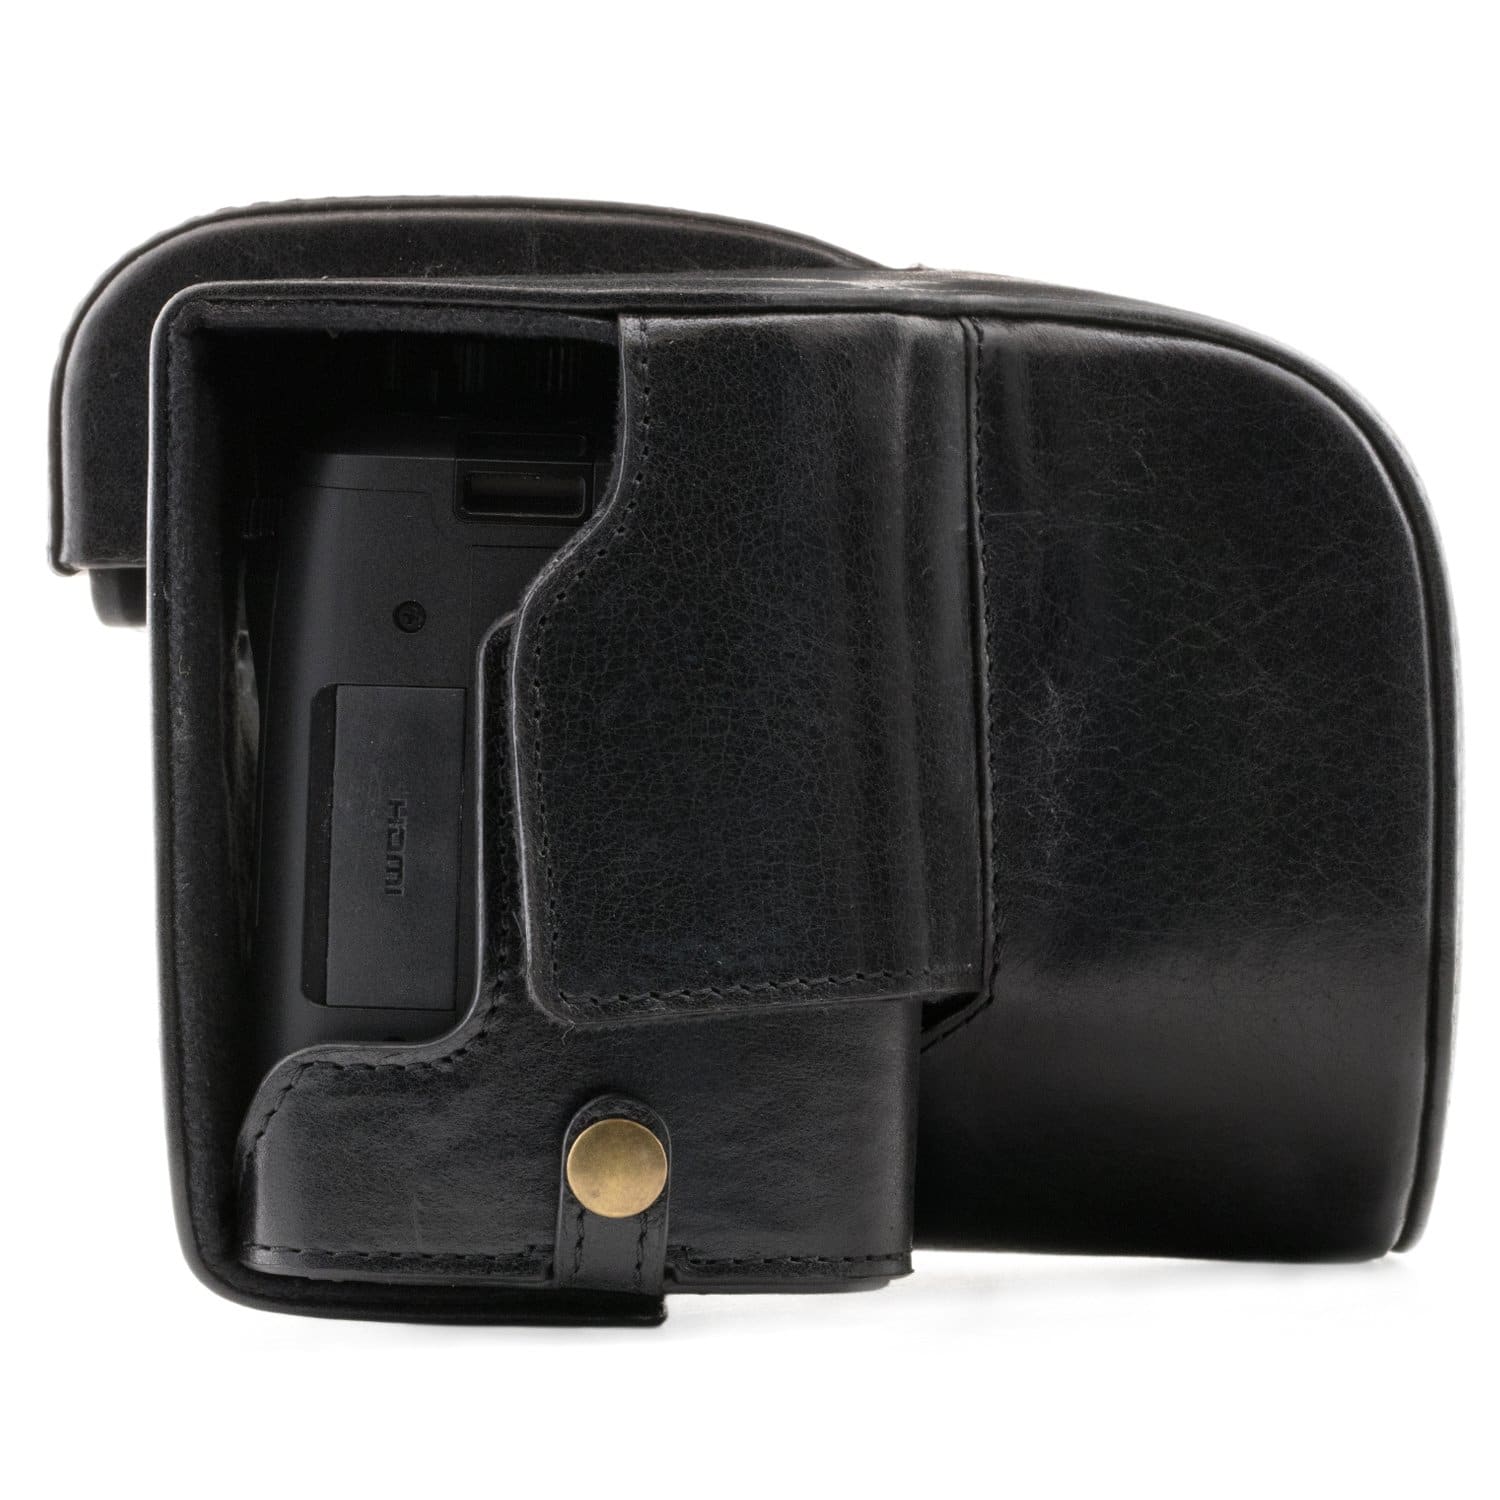 MegaGear Leica V-Lux (Typ 114) Ever Ready Top Grain Leather Camera Case ...